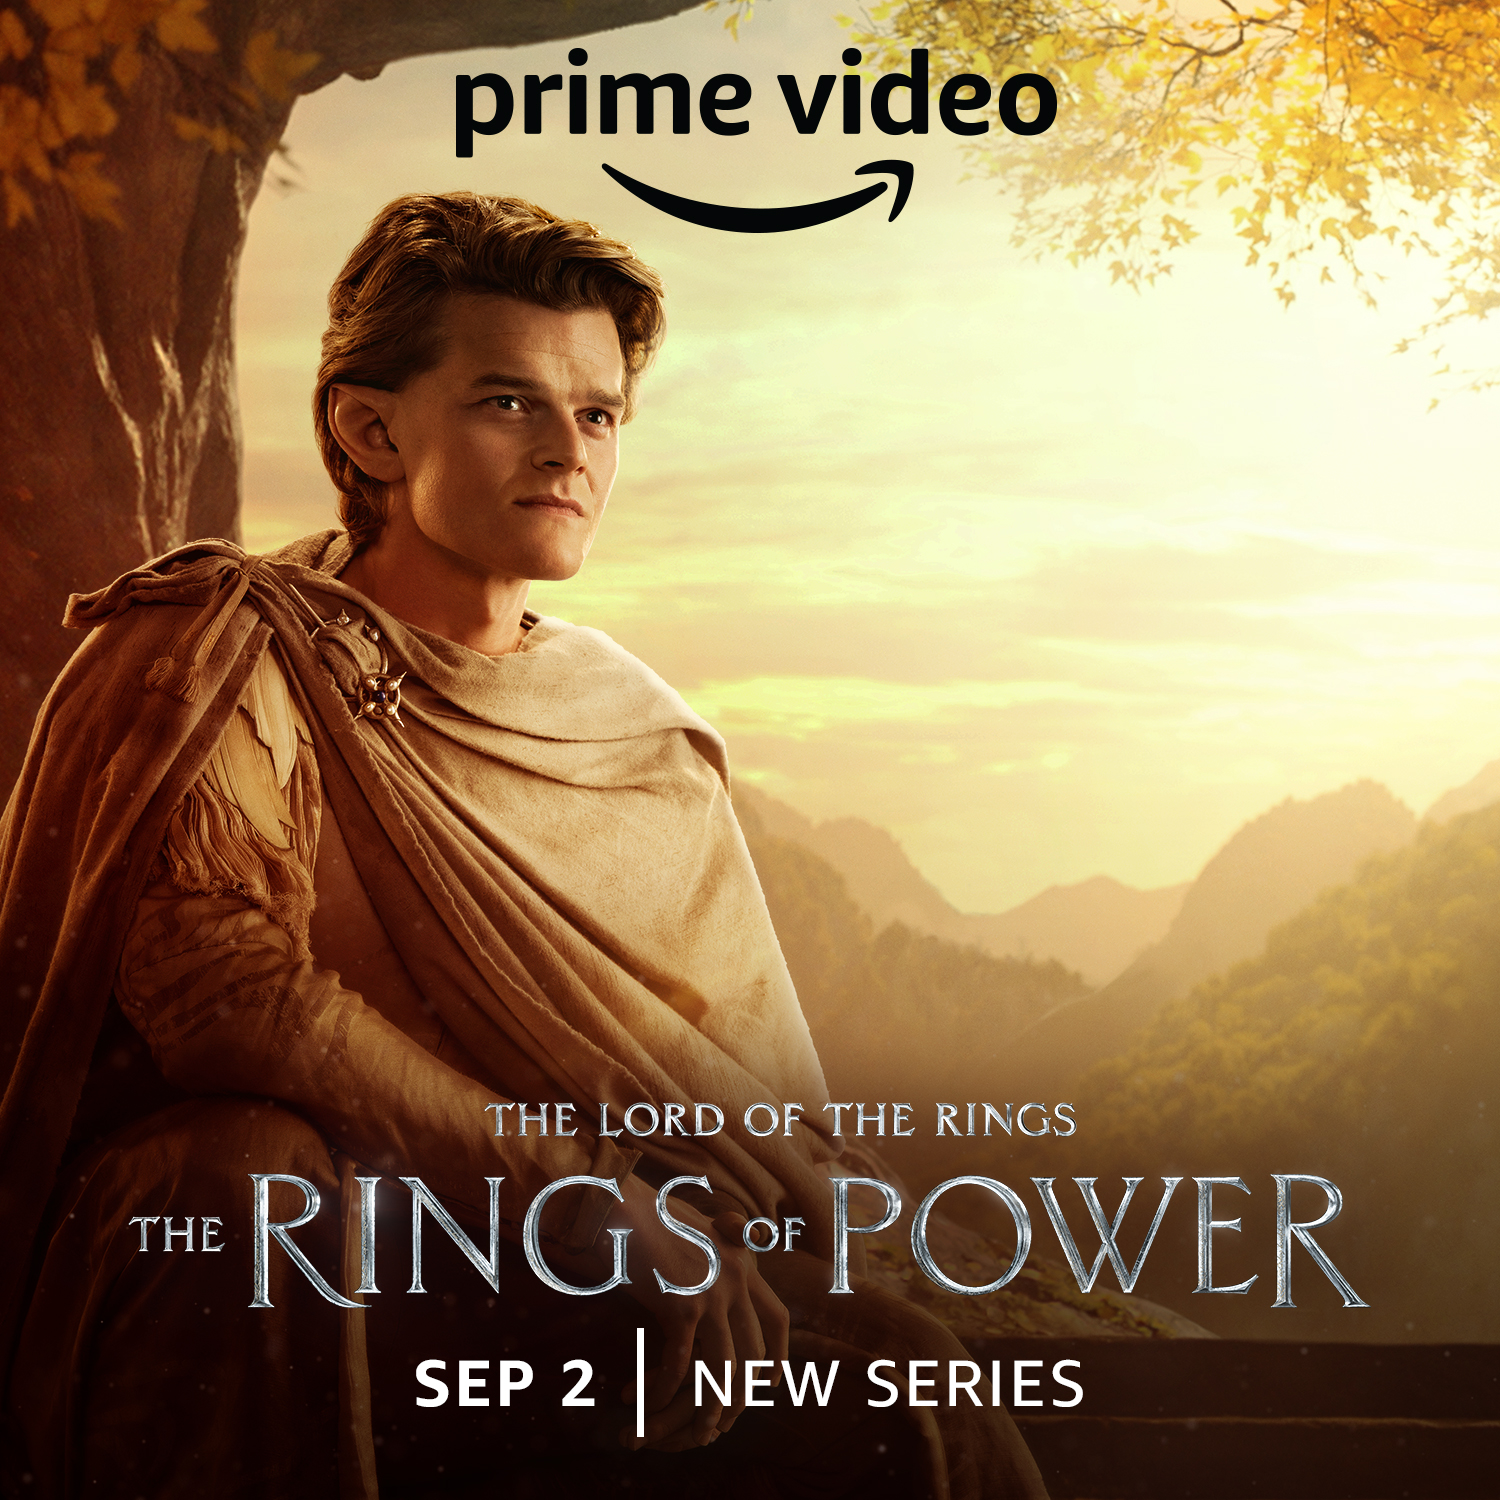 The Rings of Power Promotional